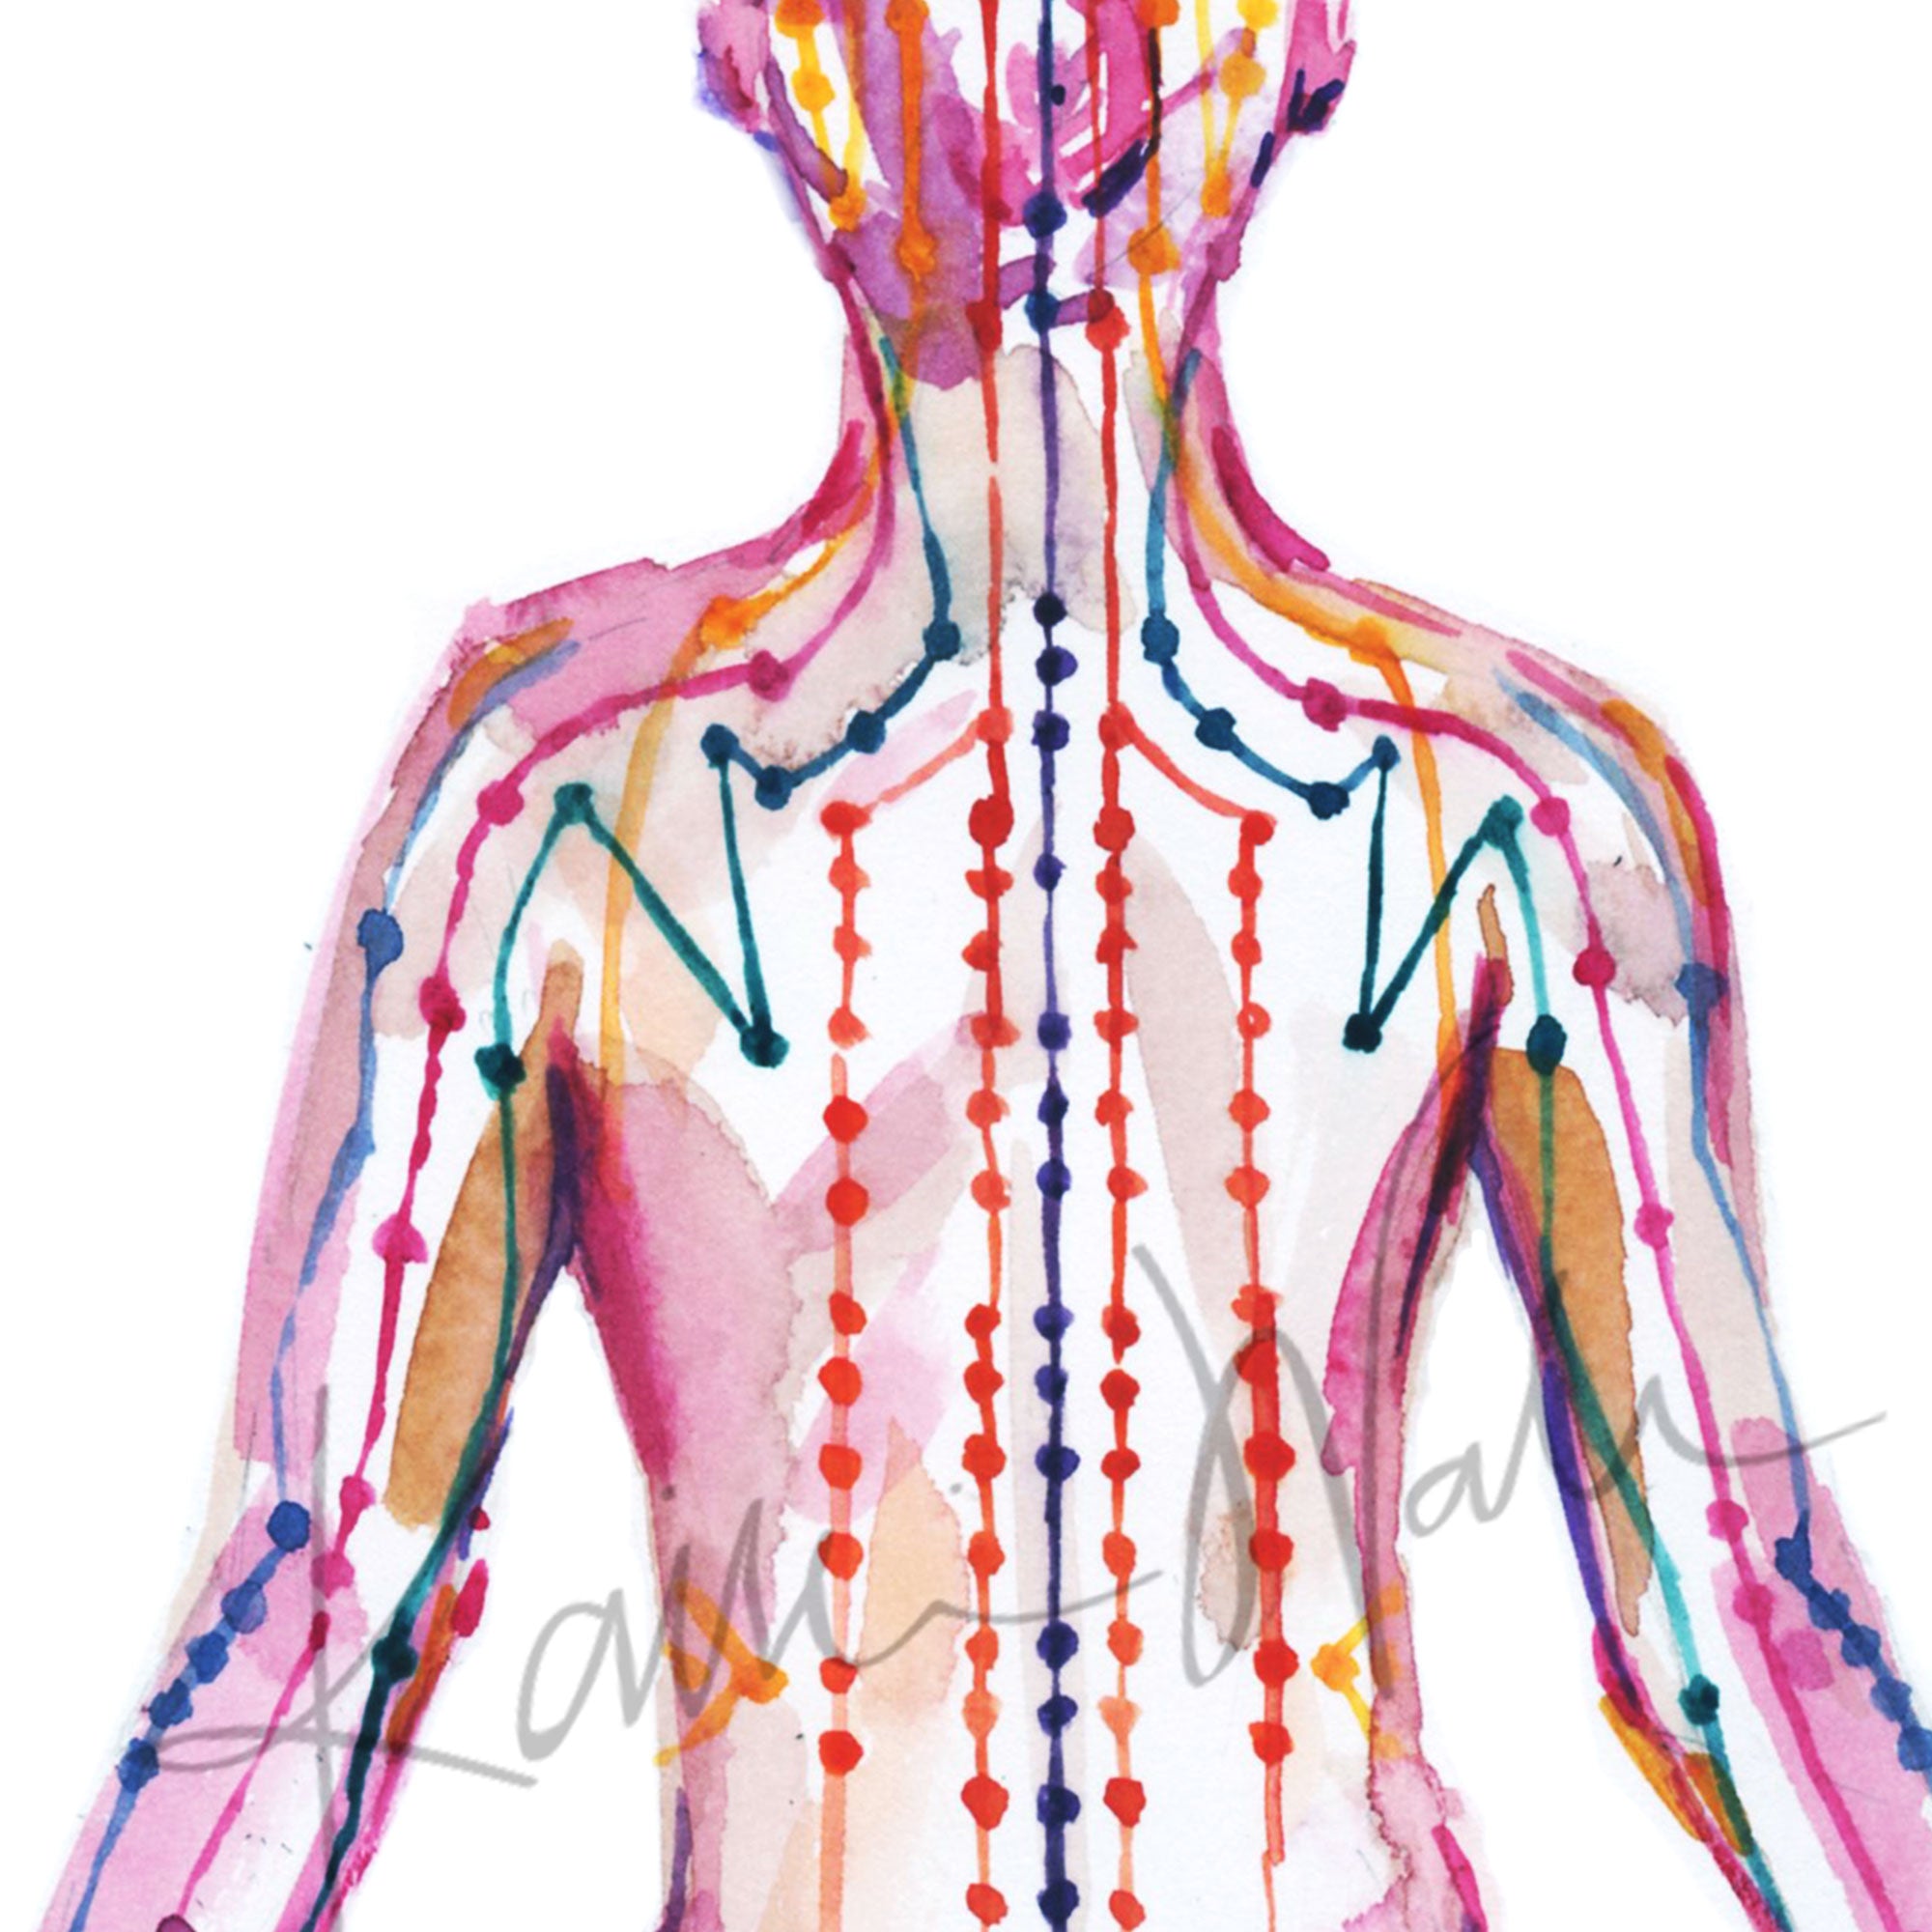 Zoomed in view of a watercolor painting of a person sitting in a meditative pose with meridian paths showing.